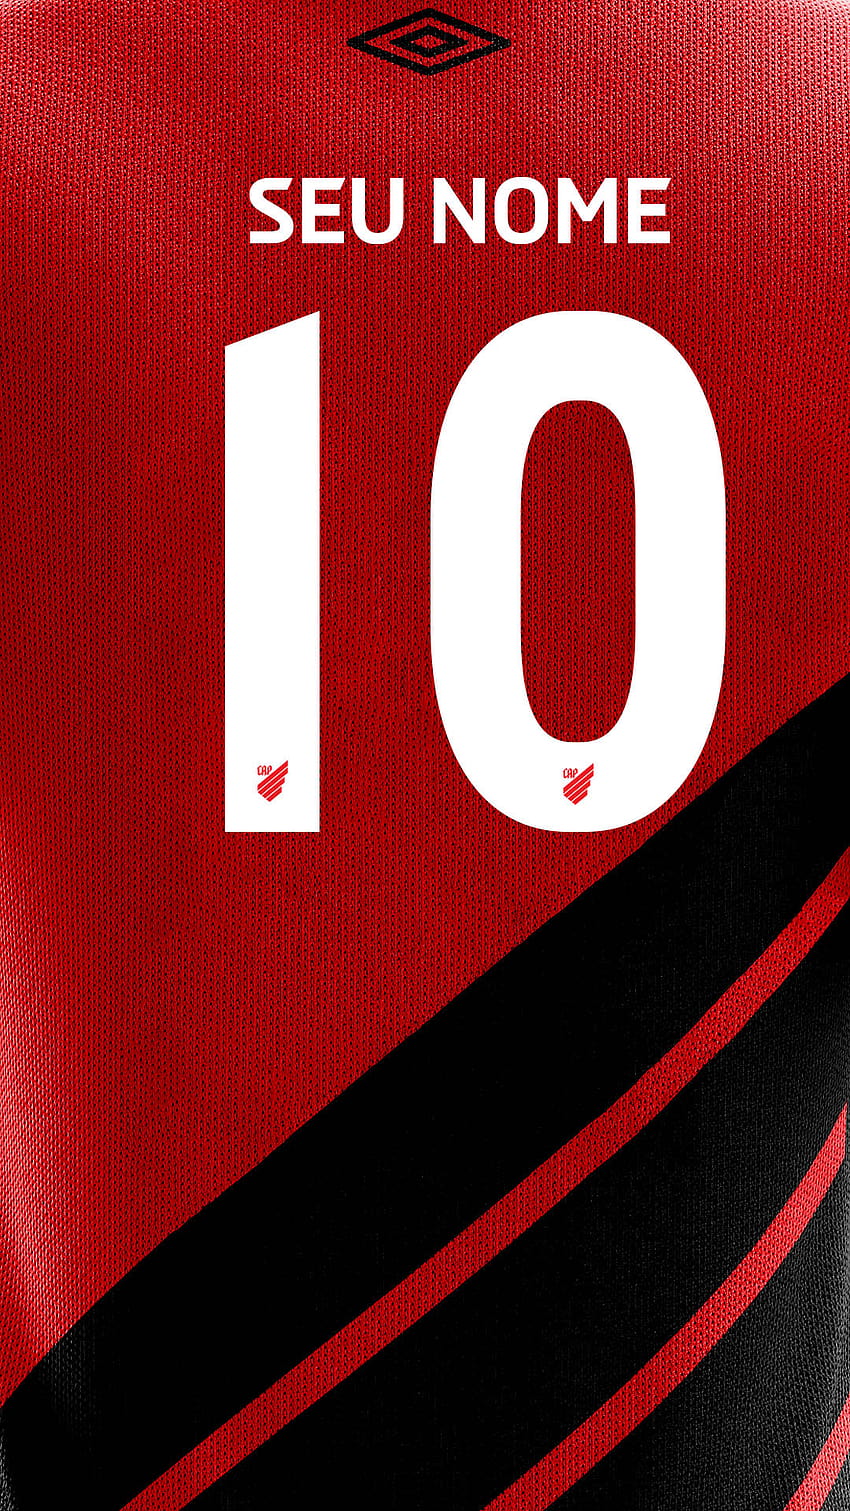 Atletico Paranaense FC, new logo, Serie A, red metal background